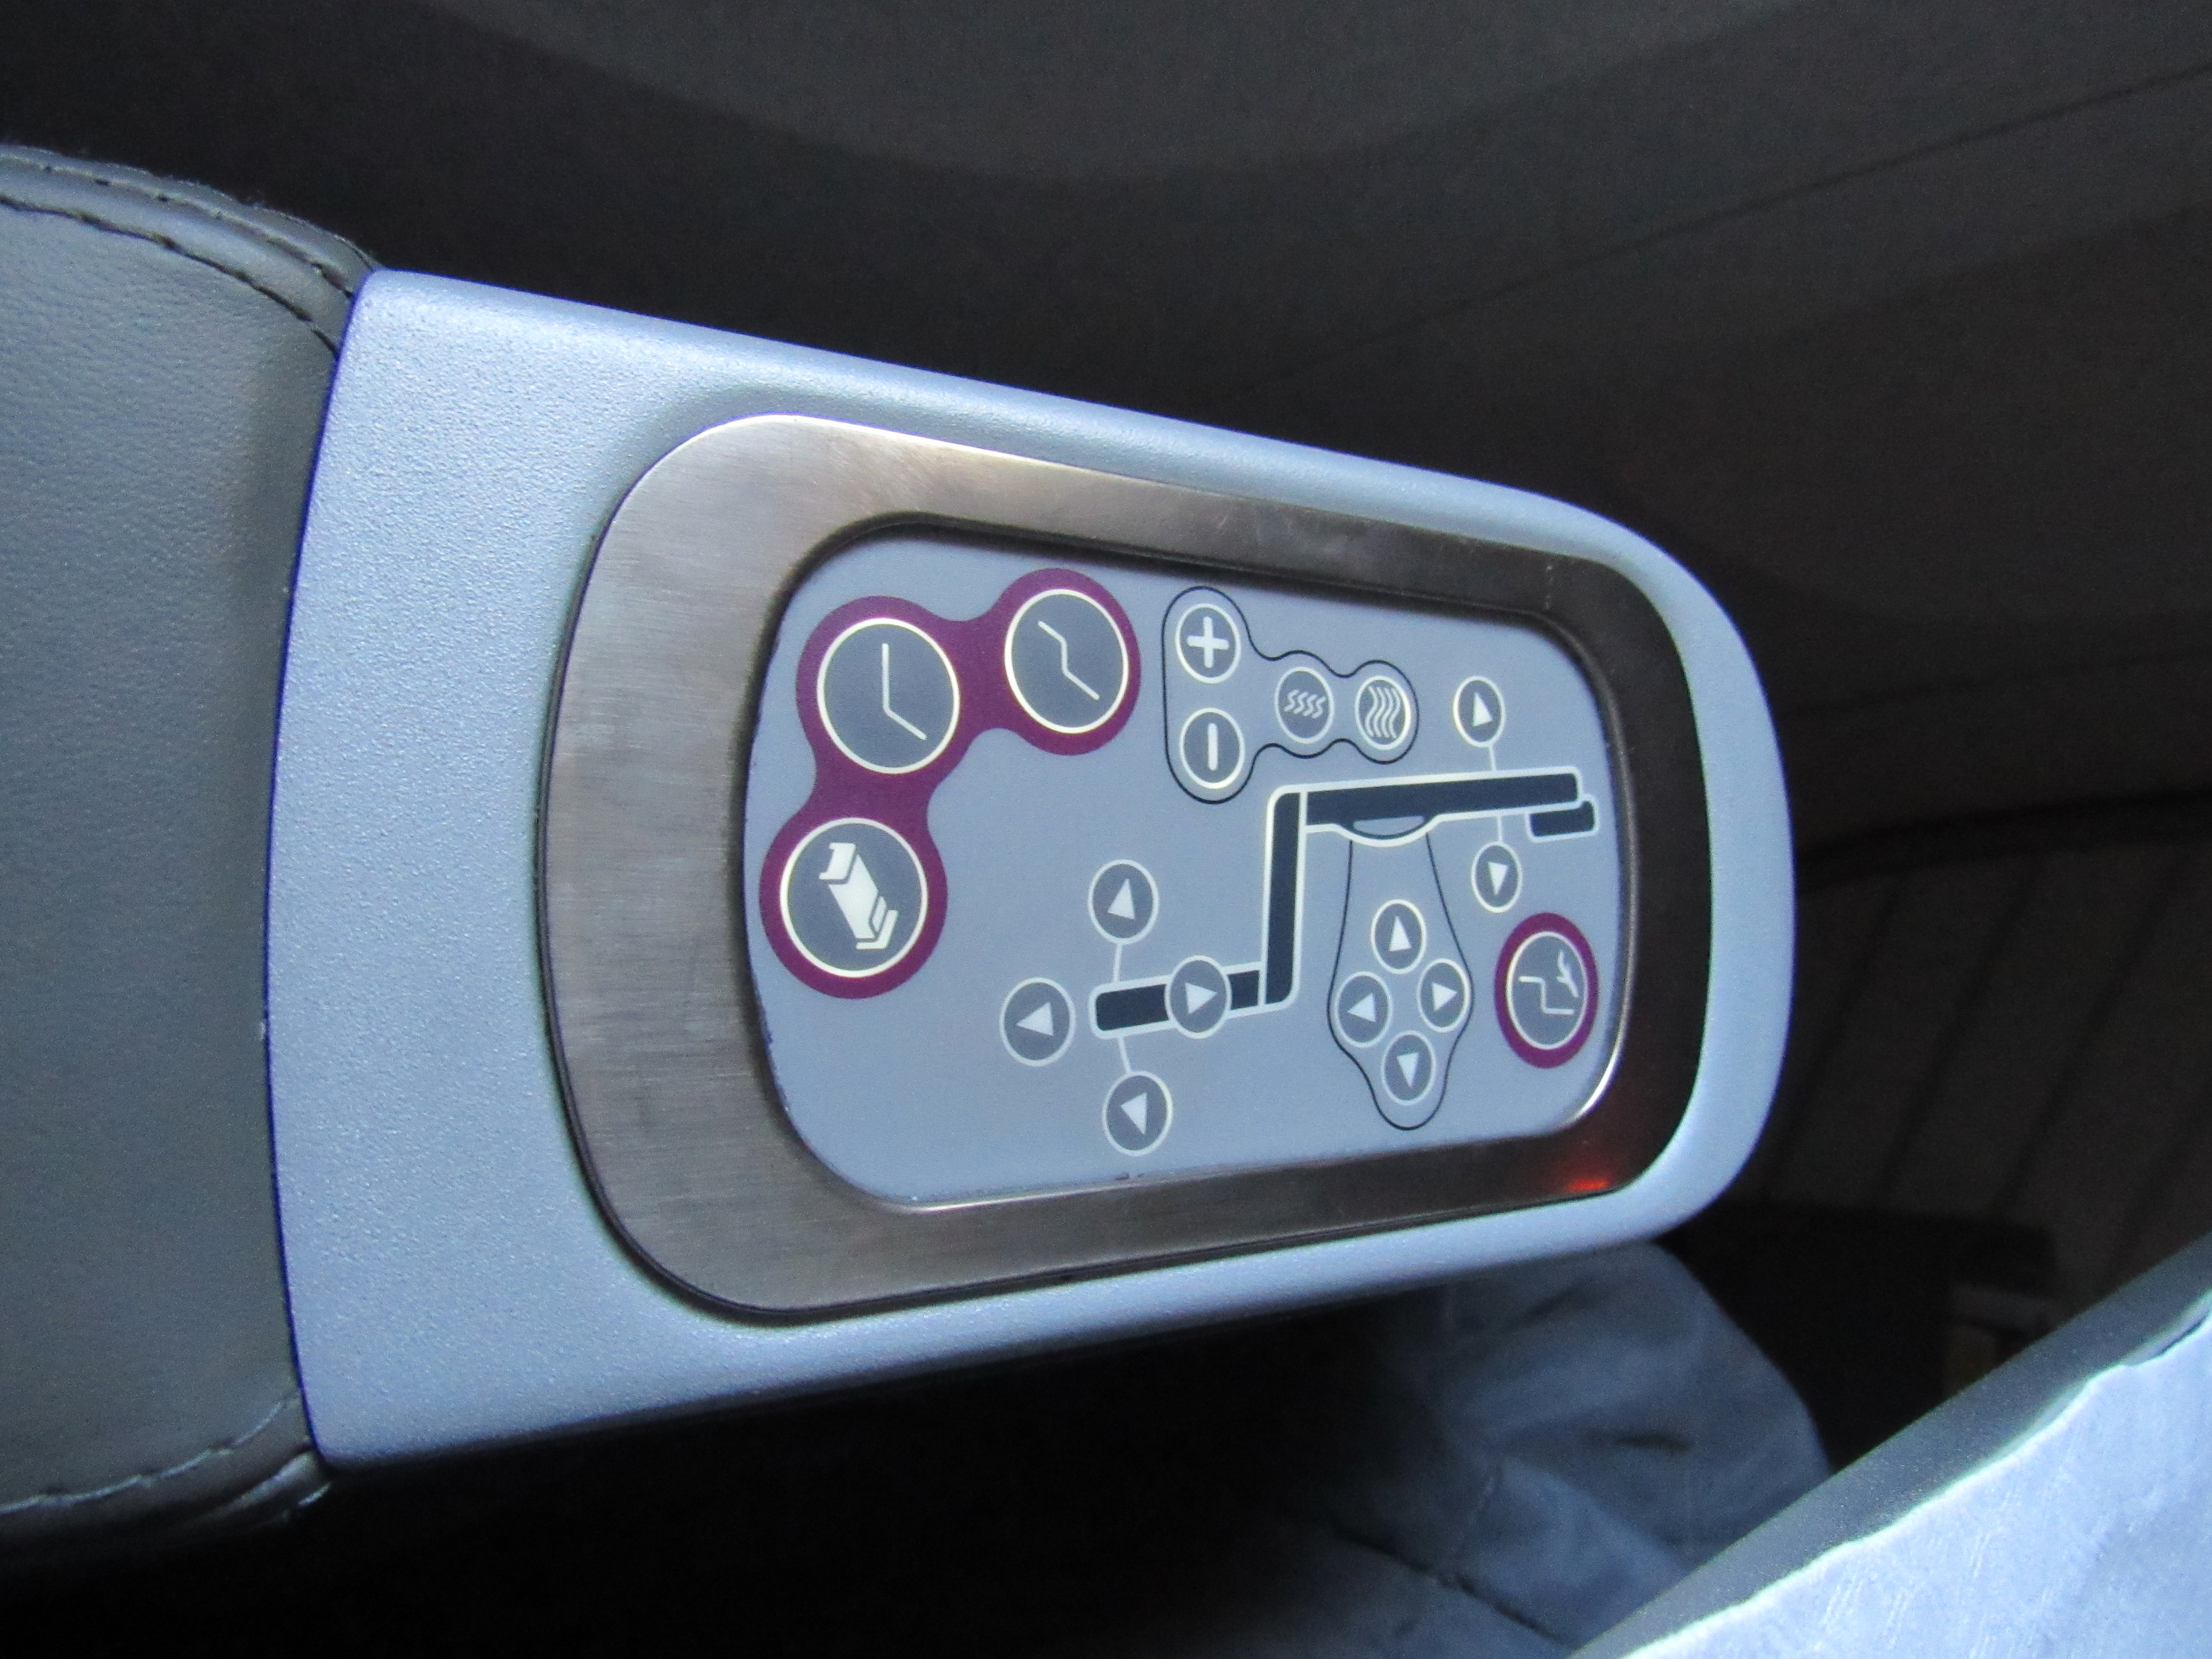 One more of the seat controls for good measure 